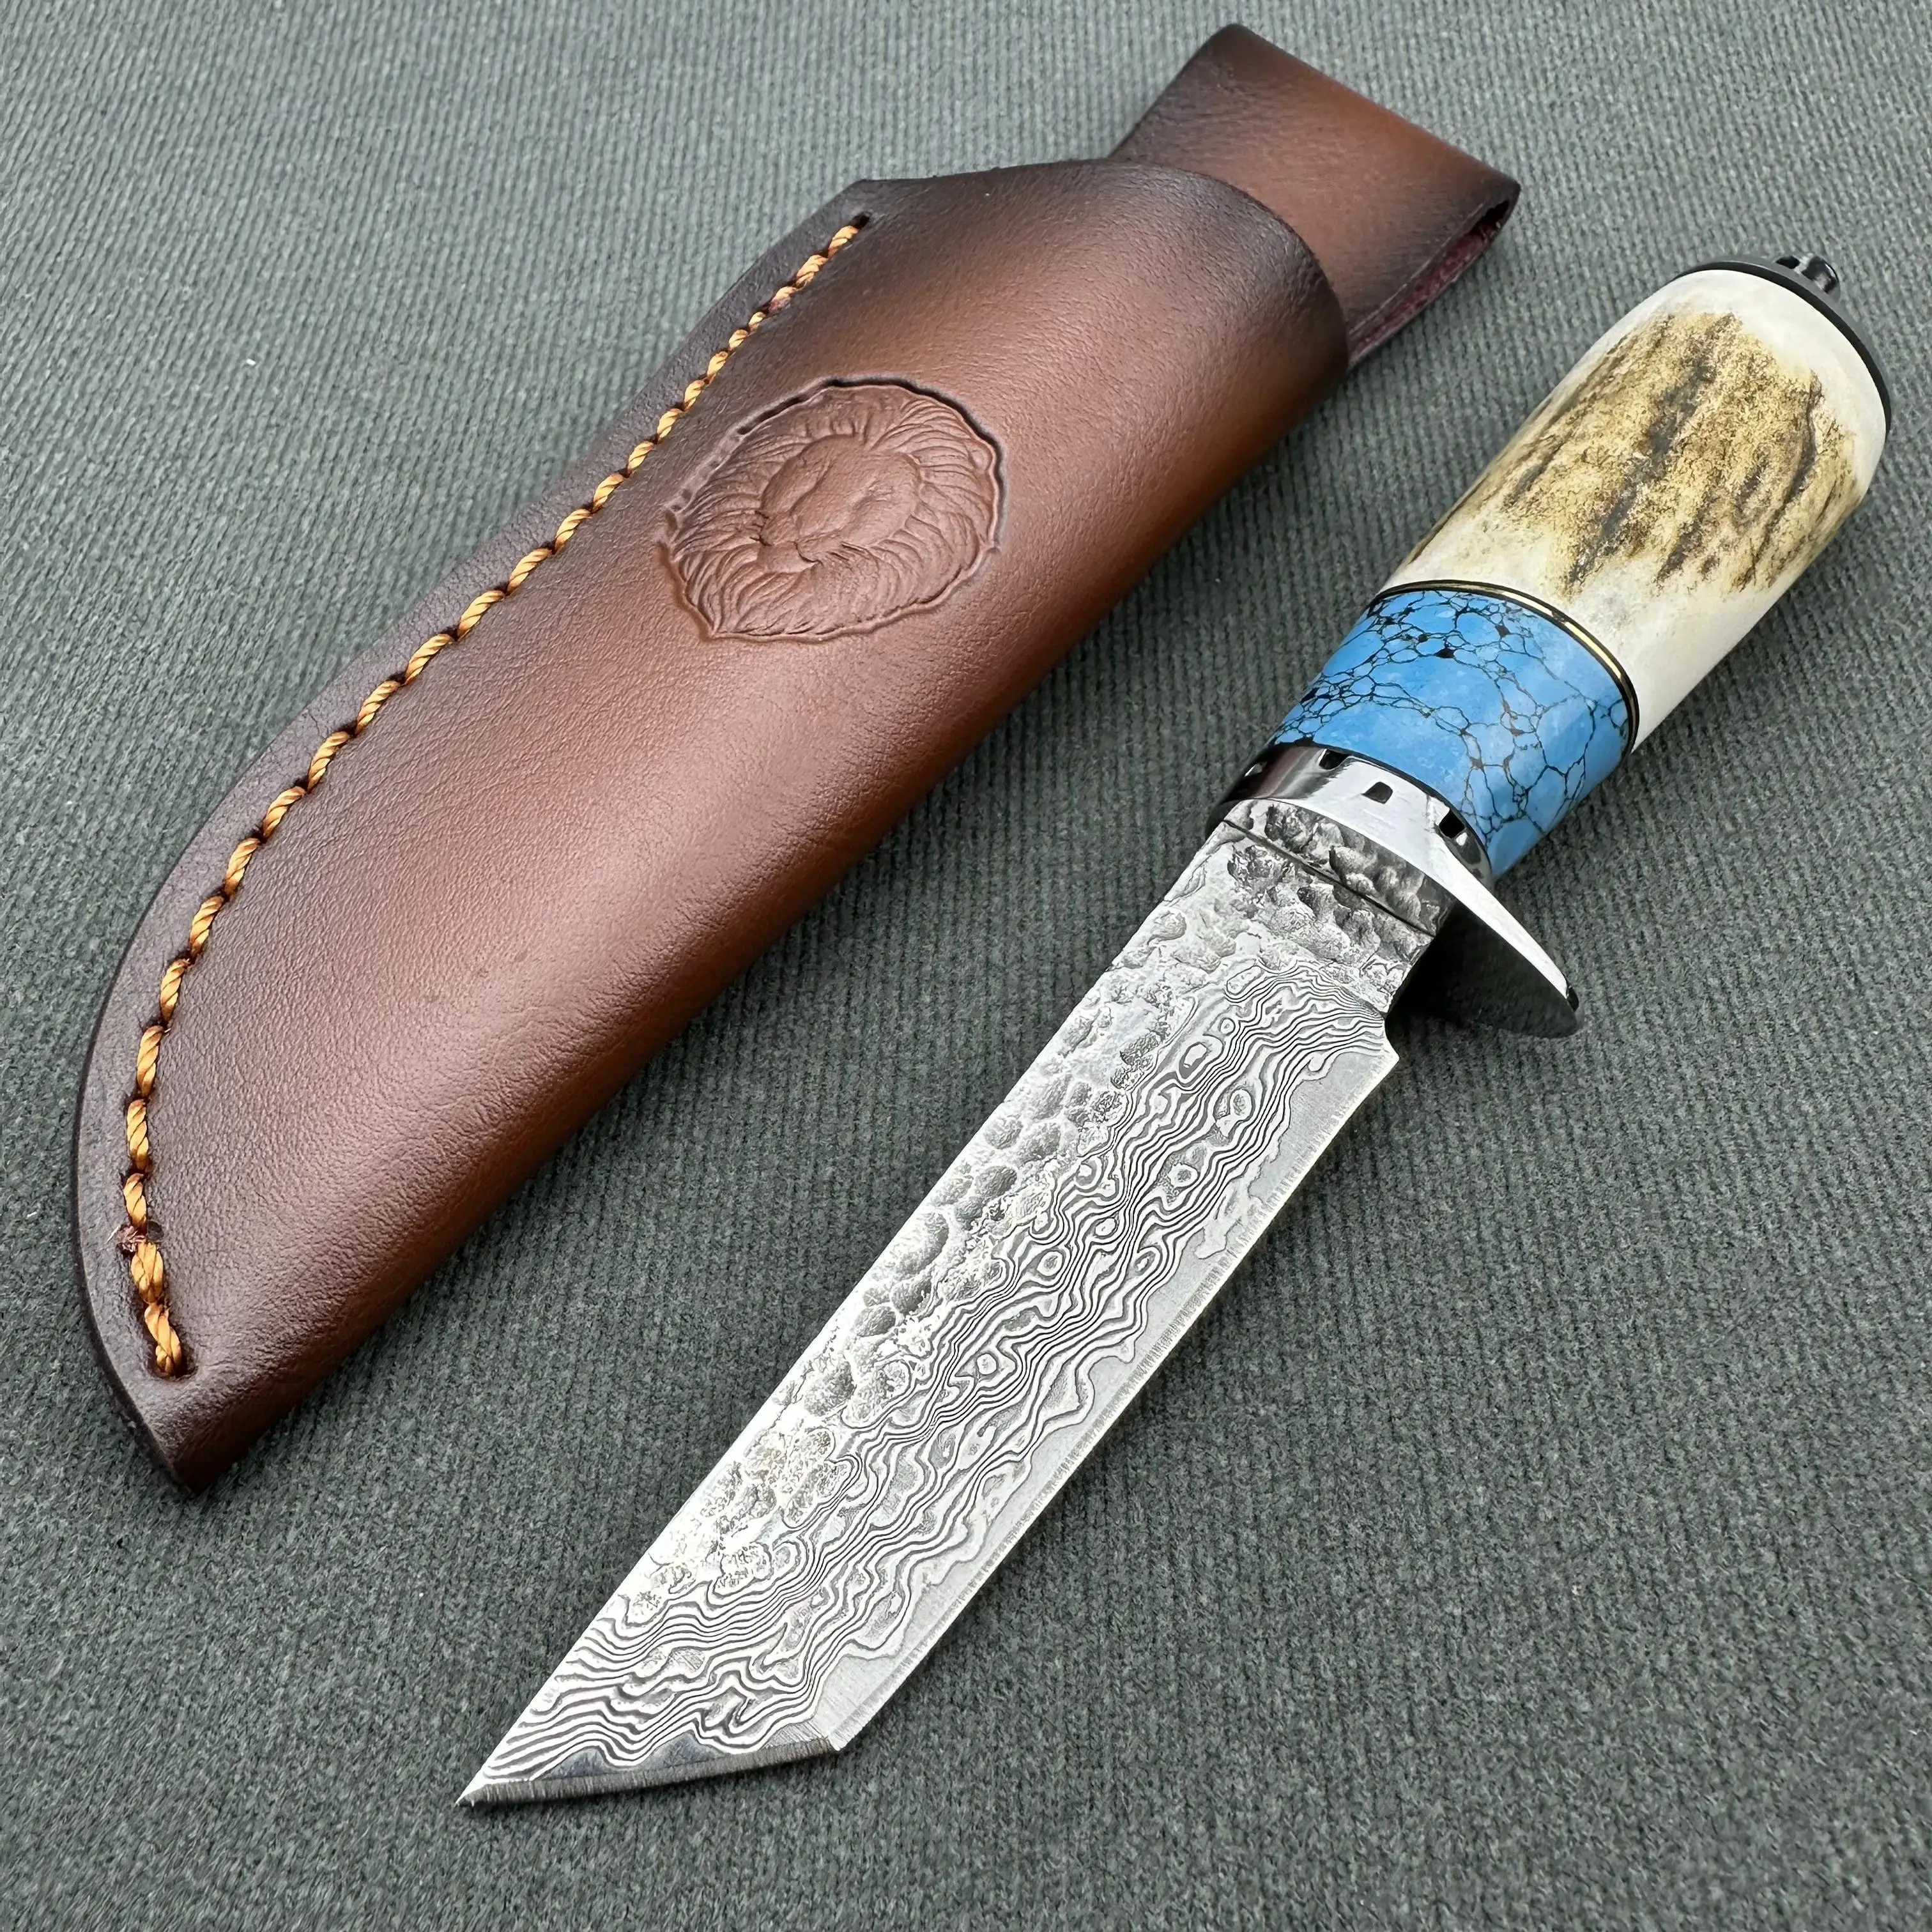 

VG10 Damascus Steel Knife Agate&Antlers Handle With Leather Sheath,Premium Fixed Knife For Outdoor Survival Hunting Collection